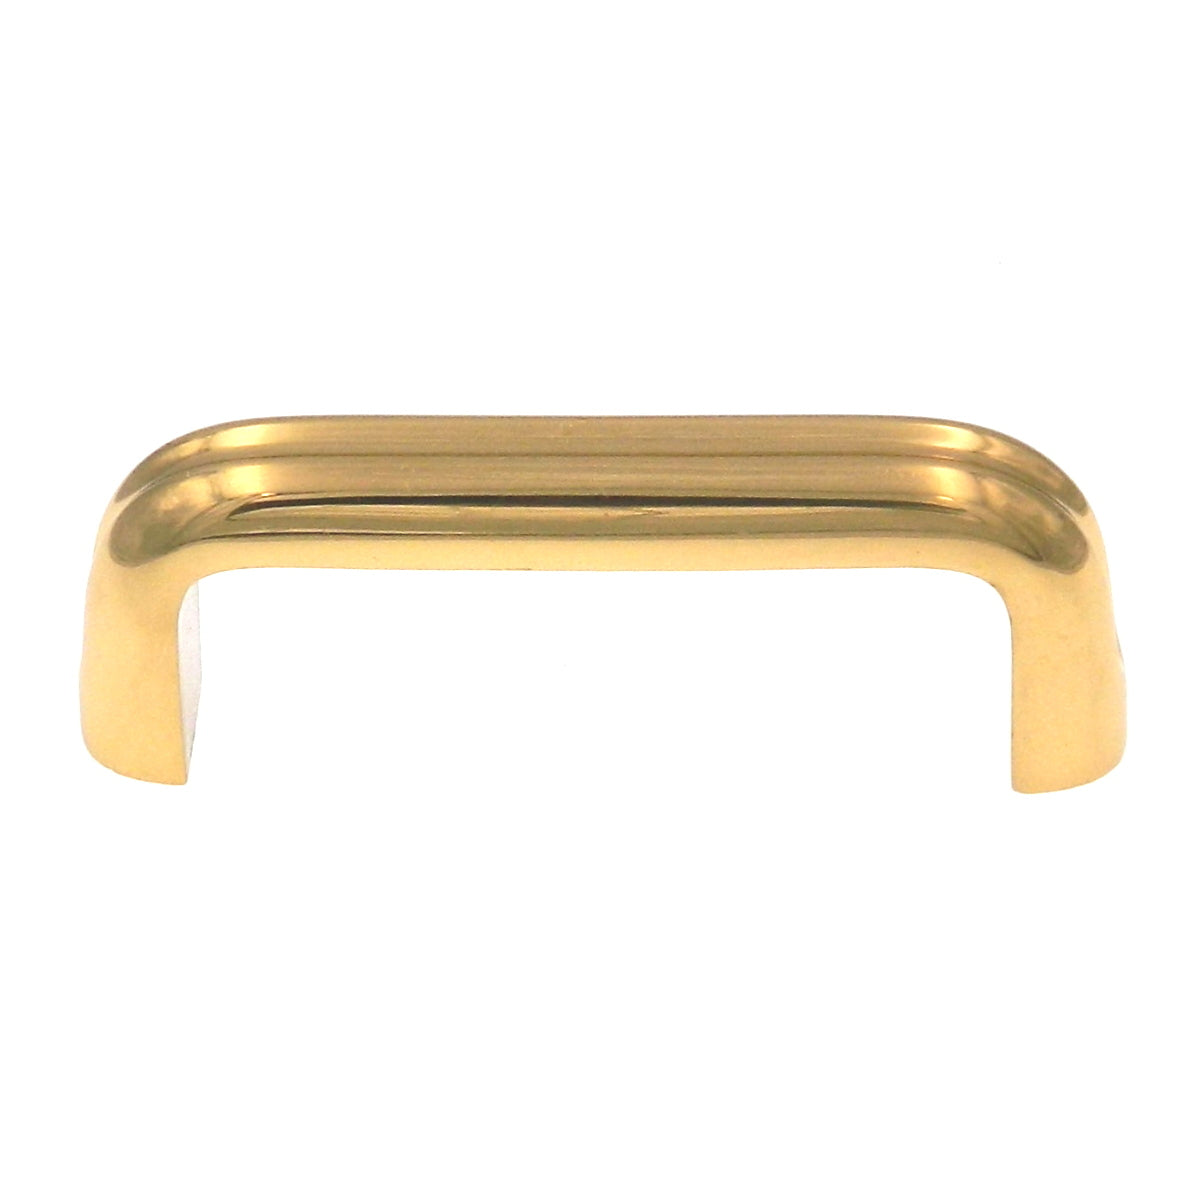 Amerock BP1414-3 Polished Brass Solid Brass 3"cc Cabinet Handle Pulls